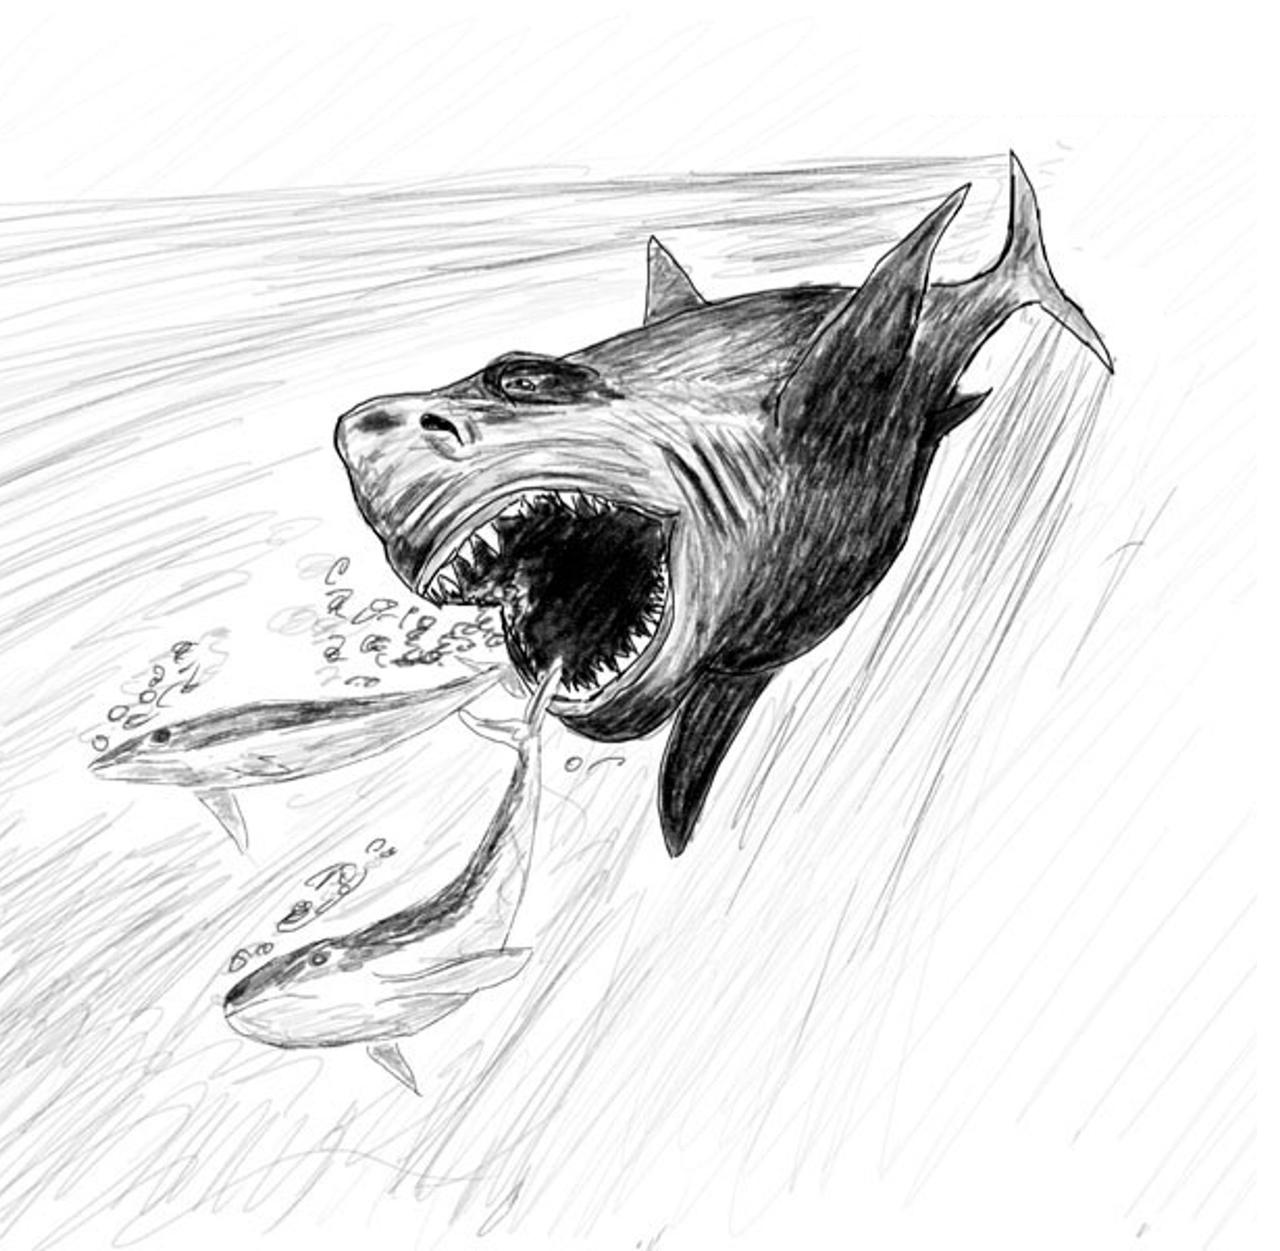 How to draw megalodon with pencil step-by-step by ImagiDraw on DeviantArt